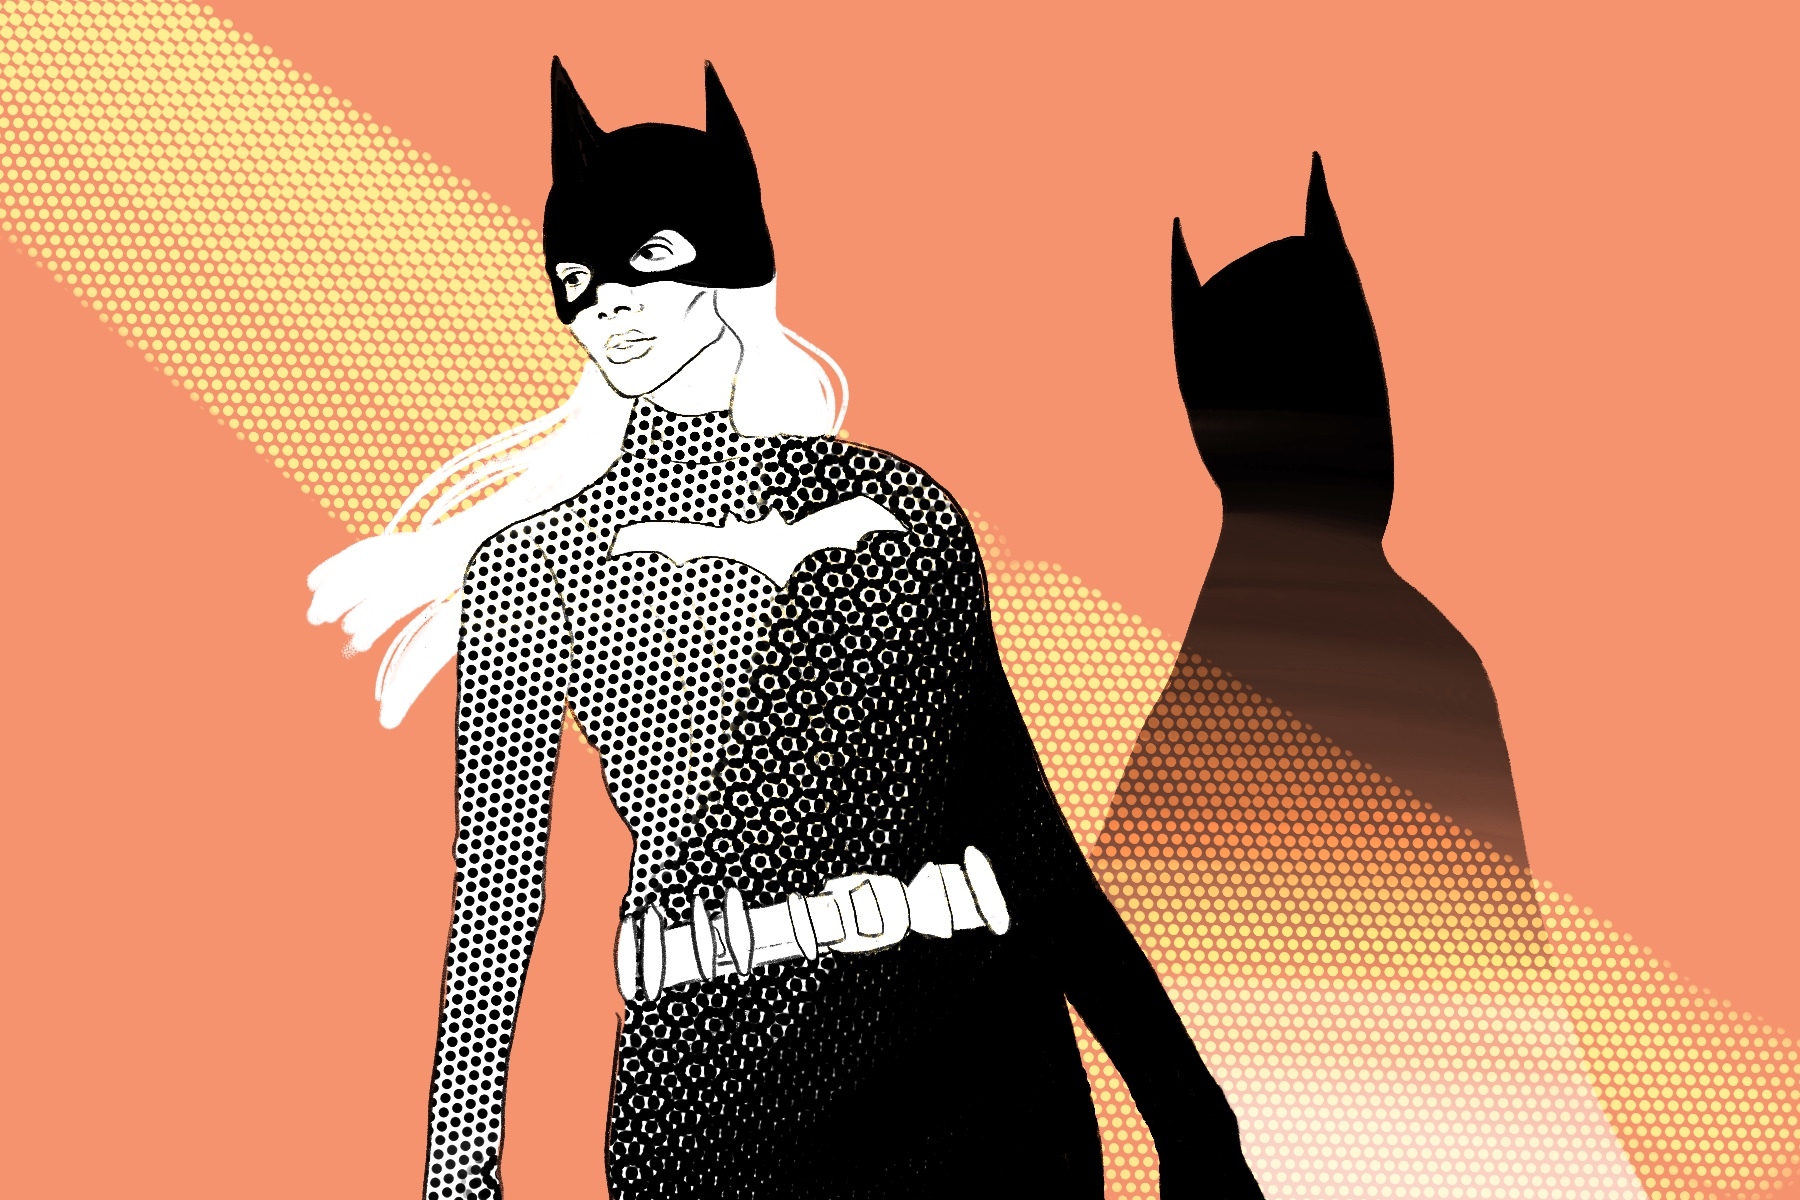 An illustration of batgirl shows the character facing to the left while a batman's shadow lurks behind her.